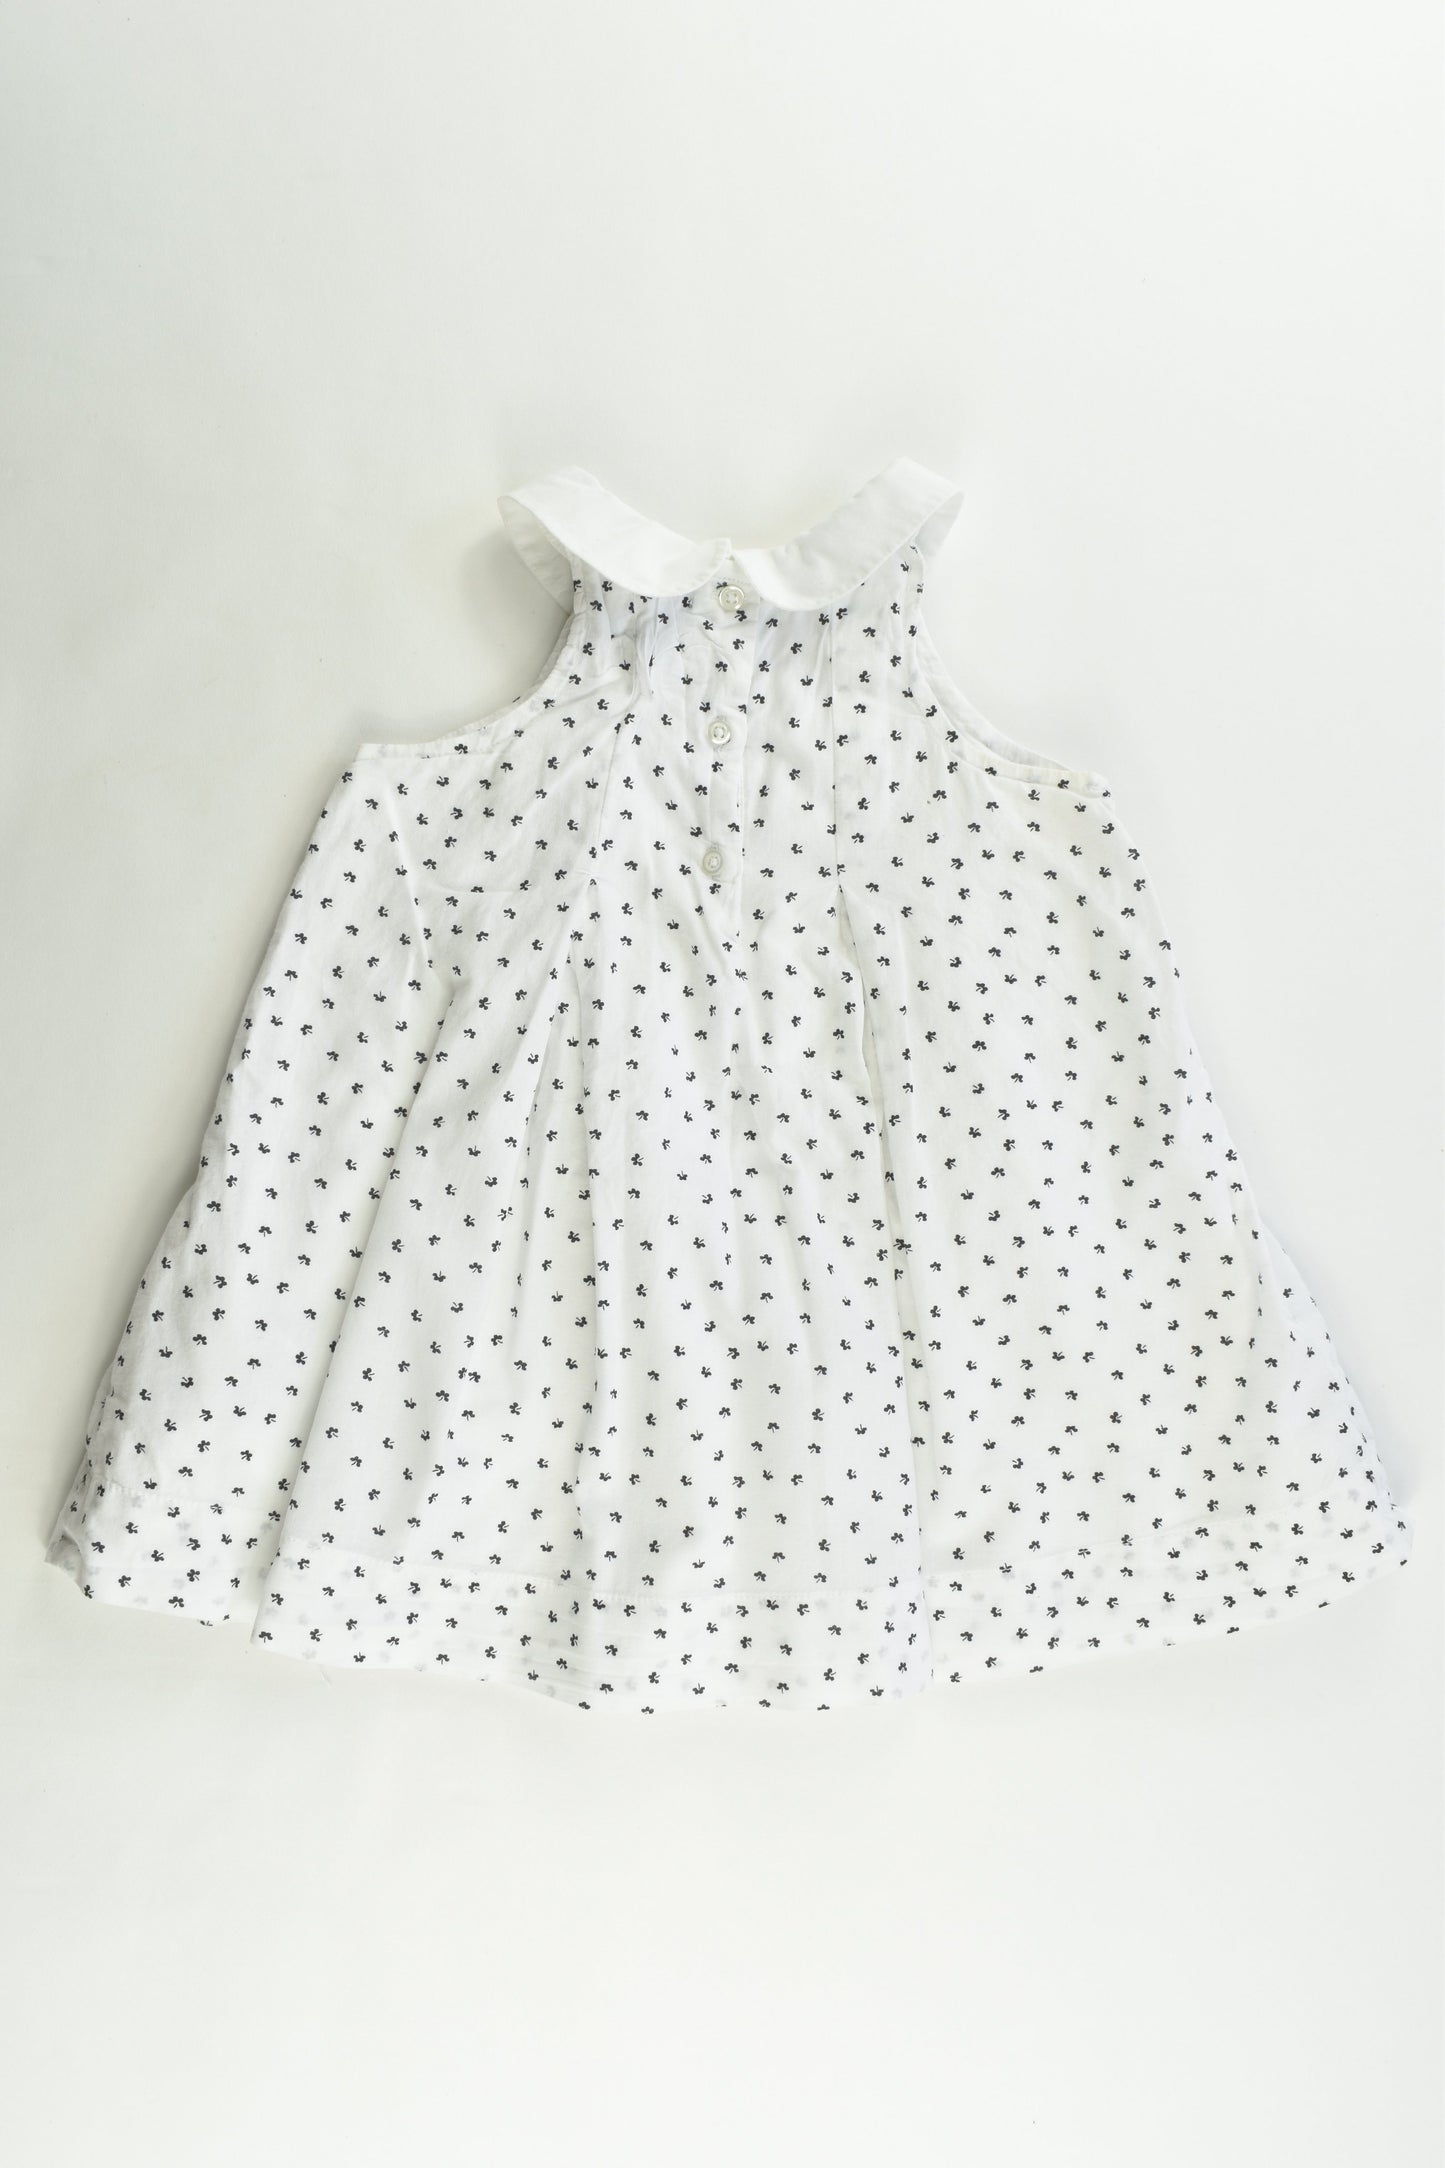 Baby Gap Size 18-24 months (90 cm) Lined Dress